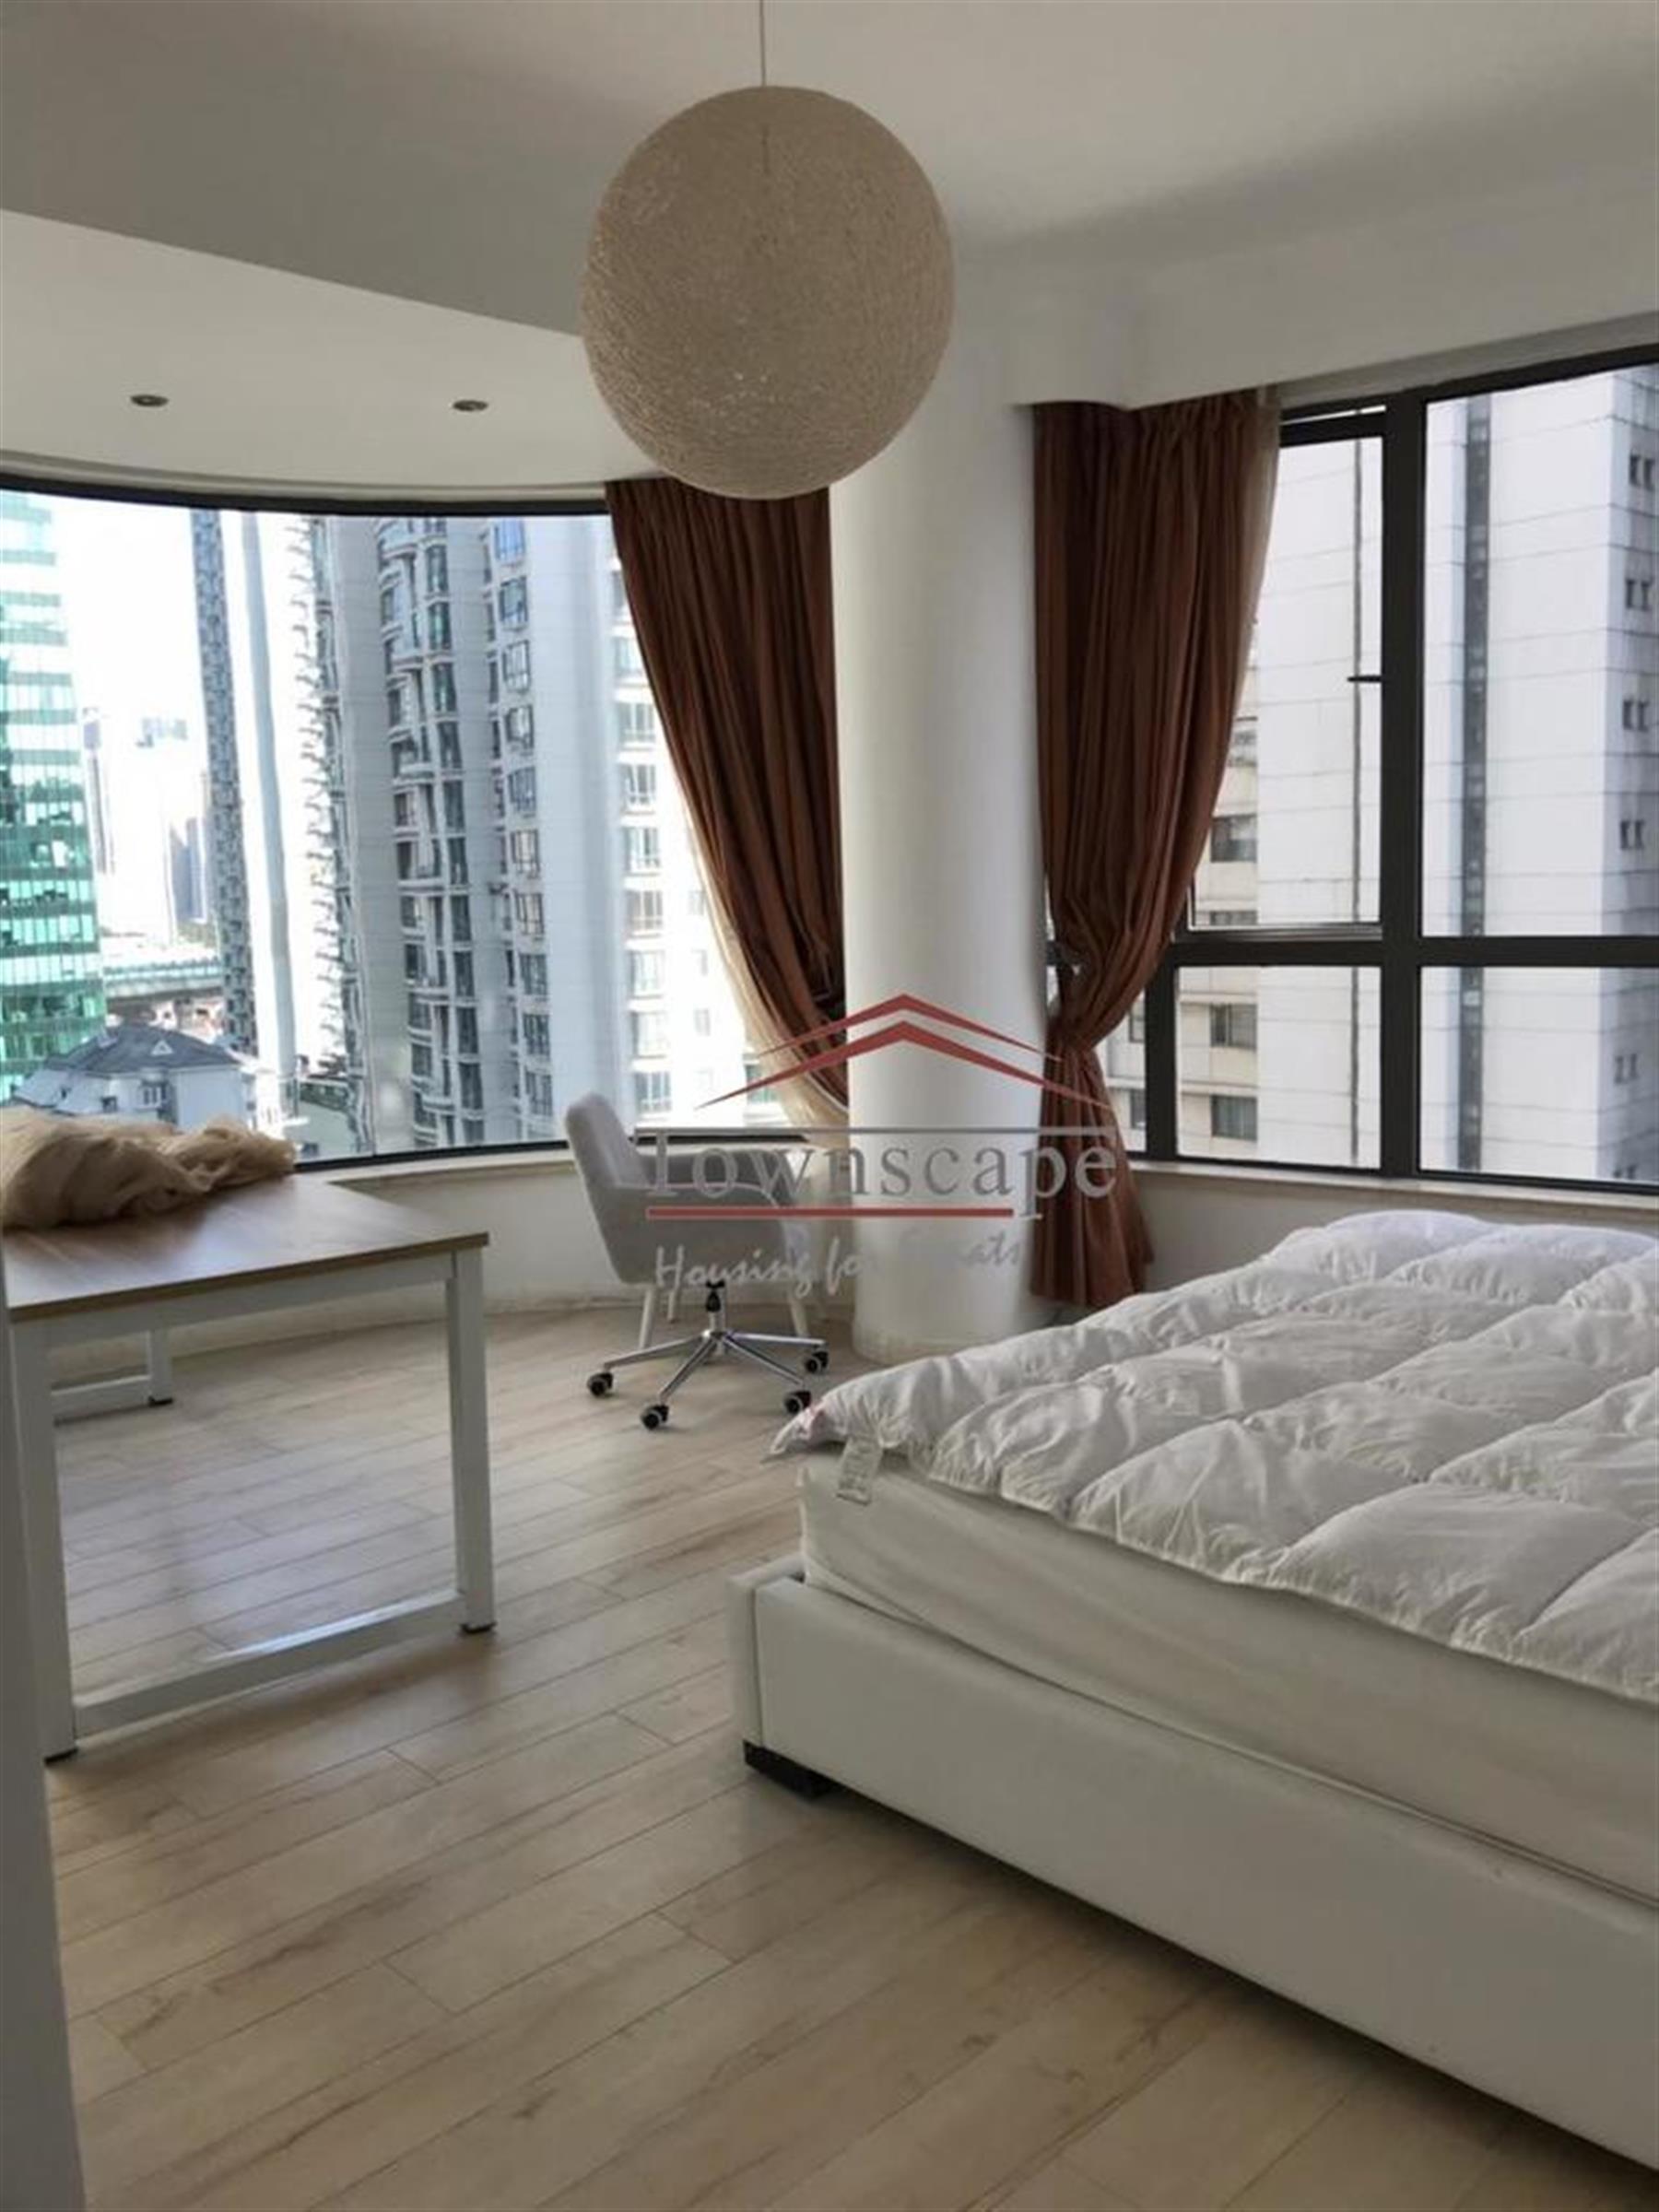 Spacious Renovated Nanjing W Rd Apartment for Rent in Shangha